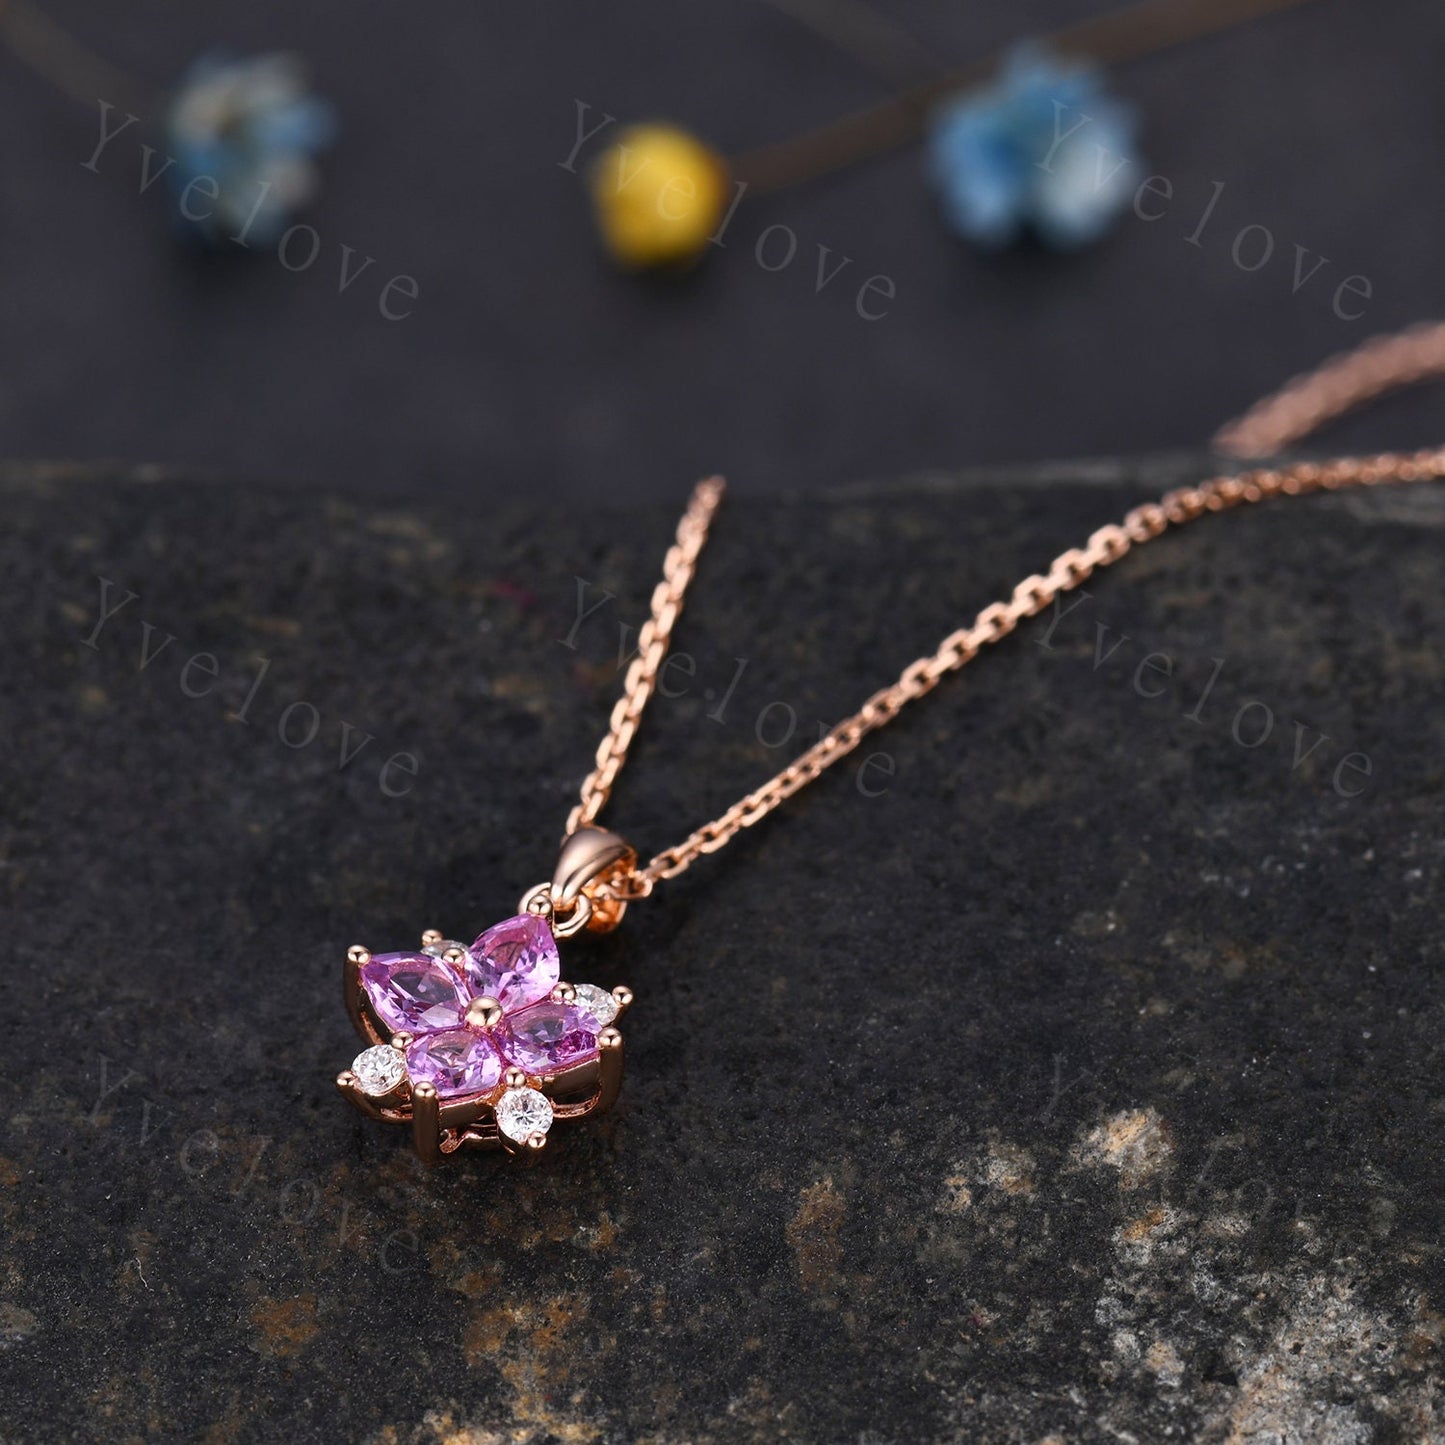 Natural Pink Sapphire Diamond Necklace,Pink Gems Pendant Floral Diamond Jewelry Delicate Dainty Necklace Gift For Women or Her,White Gold